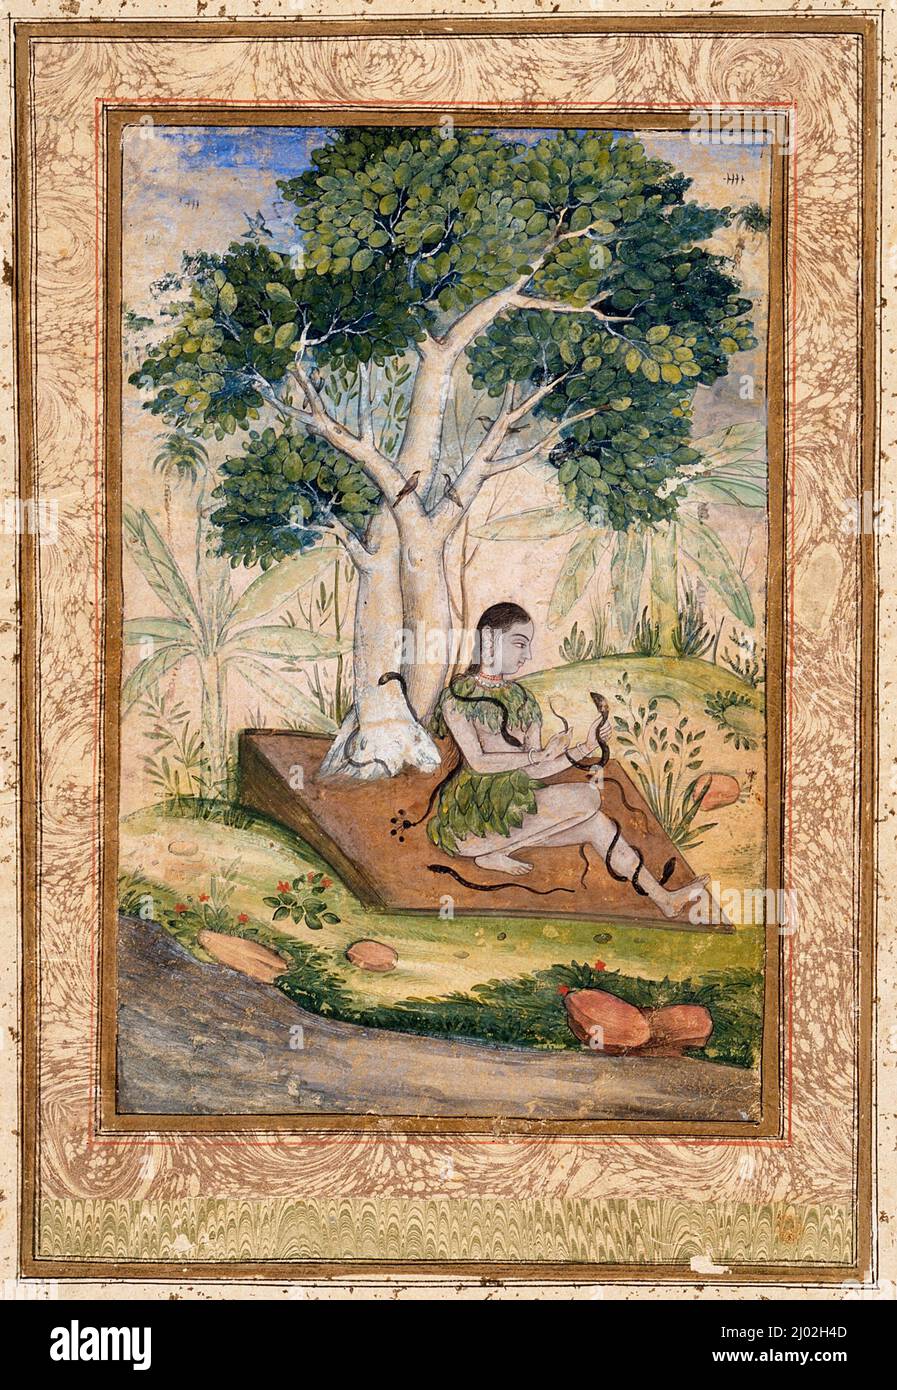 Asavari Ragini, Fourth Wife of Shri Raga, Folio from a Ragamala (Garland of Melodies). India, Sub-Imperial Mughal, circa 1625. Drawings; watercolors. Opaque watercolor and gold on paper; marbled paper inner border Stock Photo